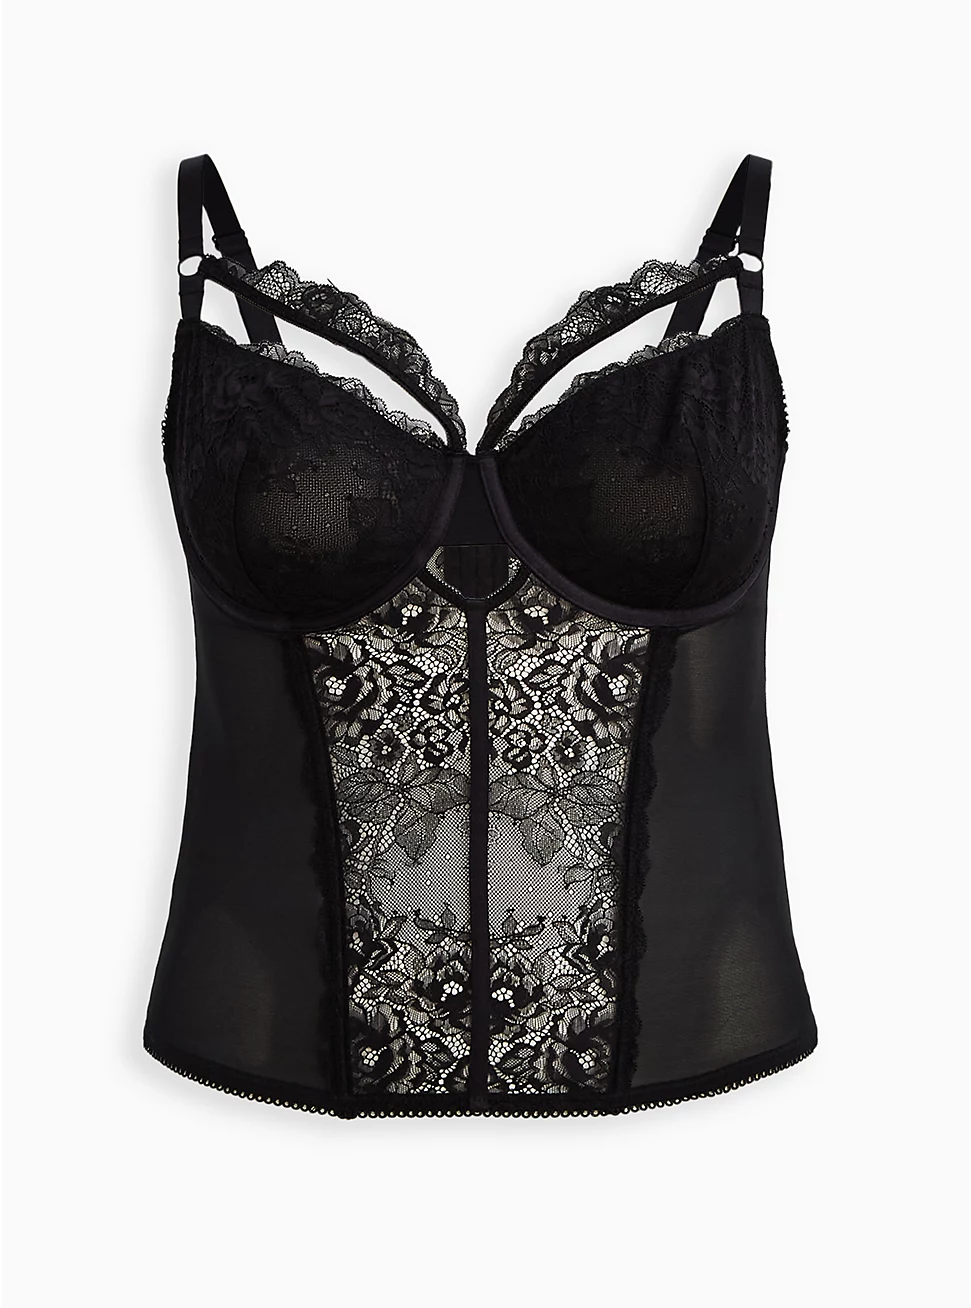 Sexy lingerie bustier piece for women | The Dating Divas 
